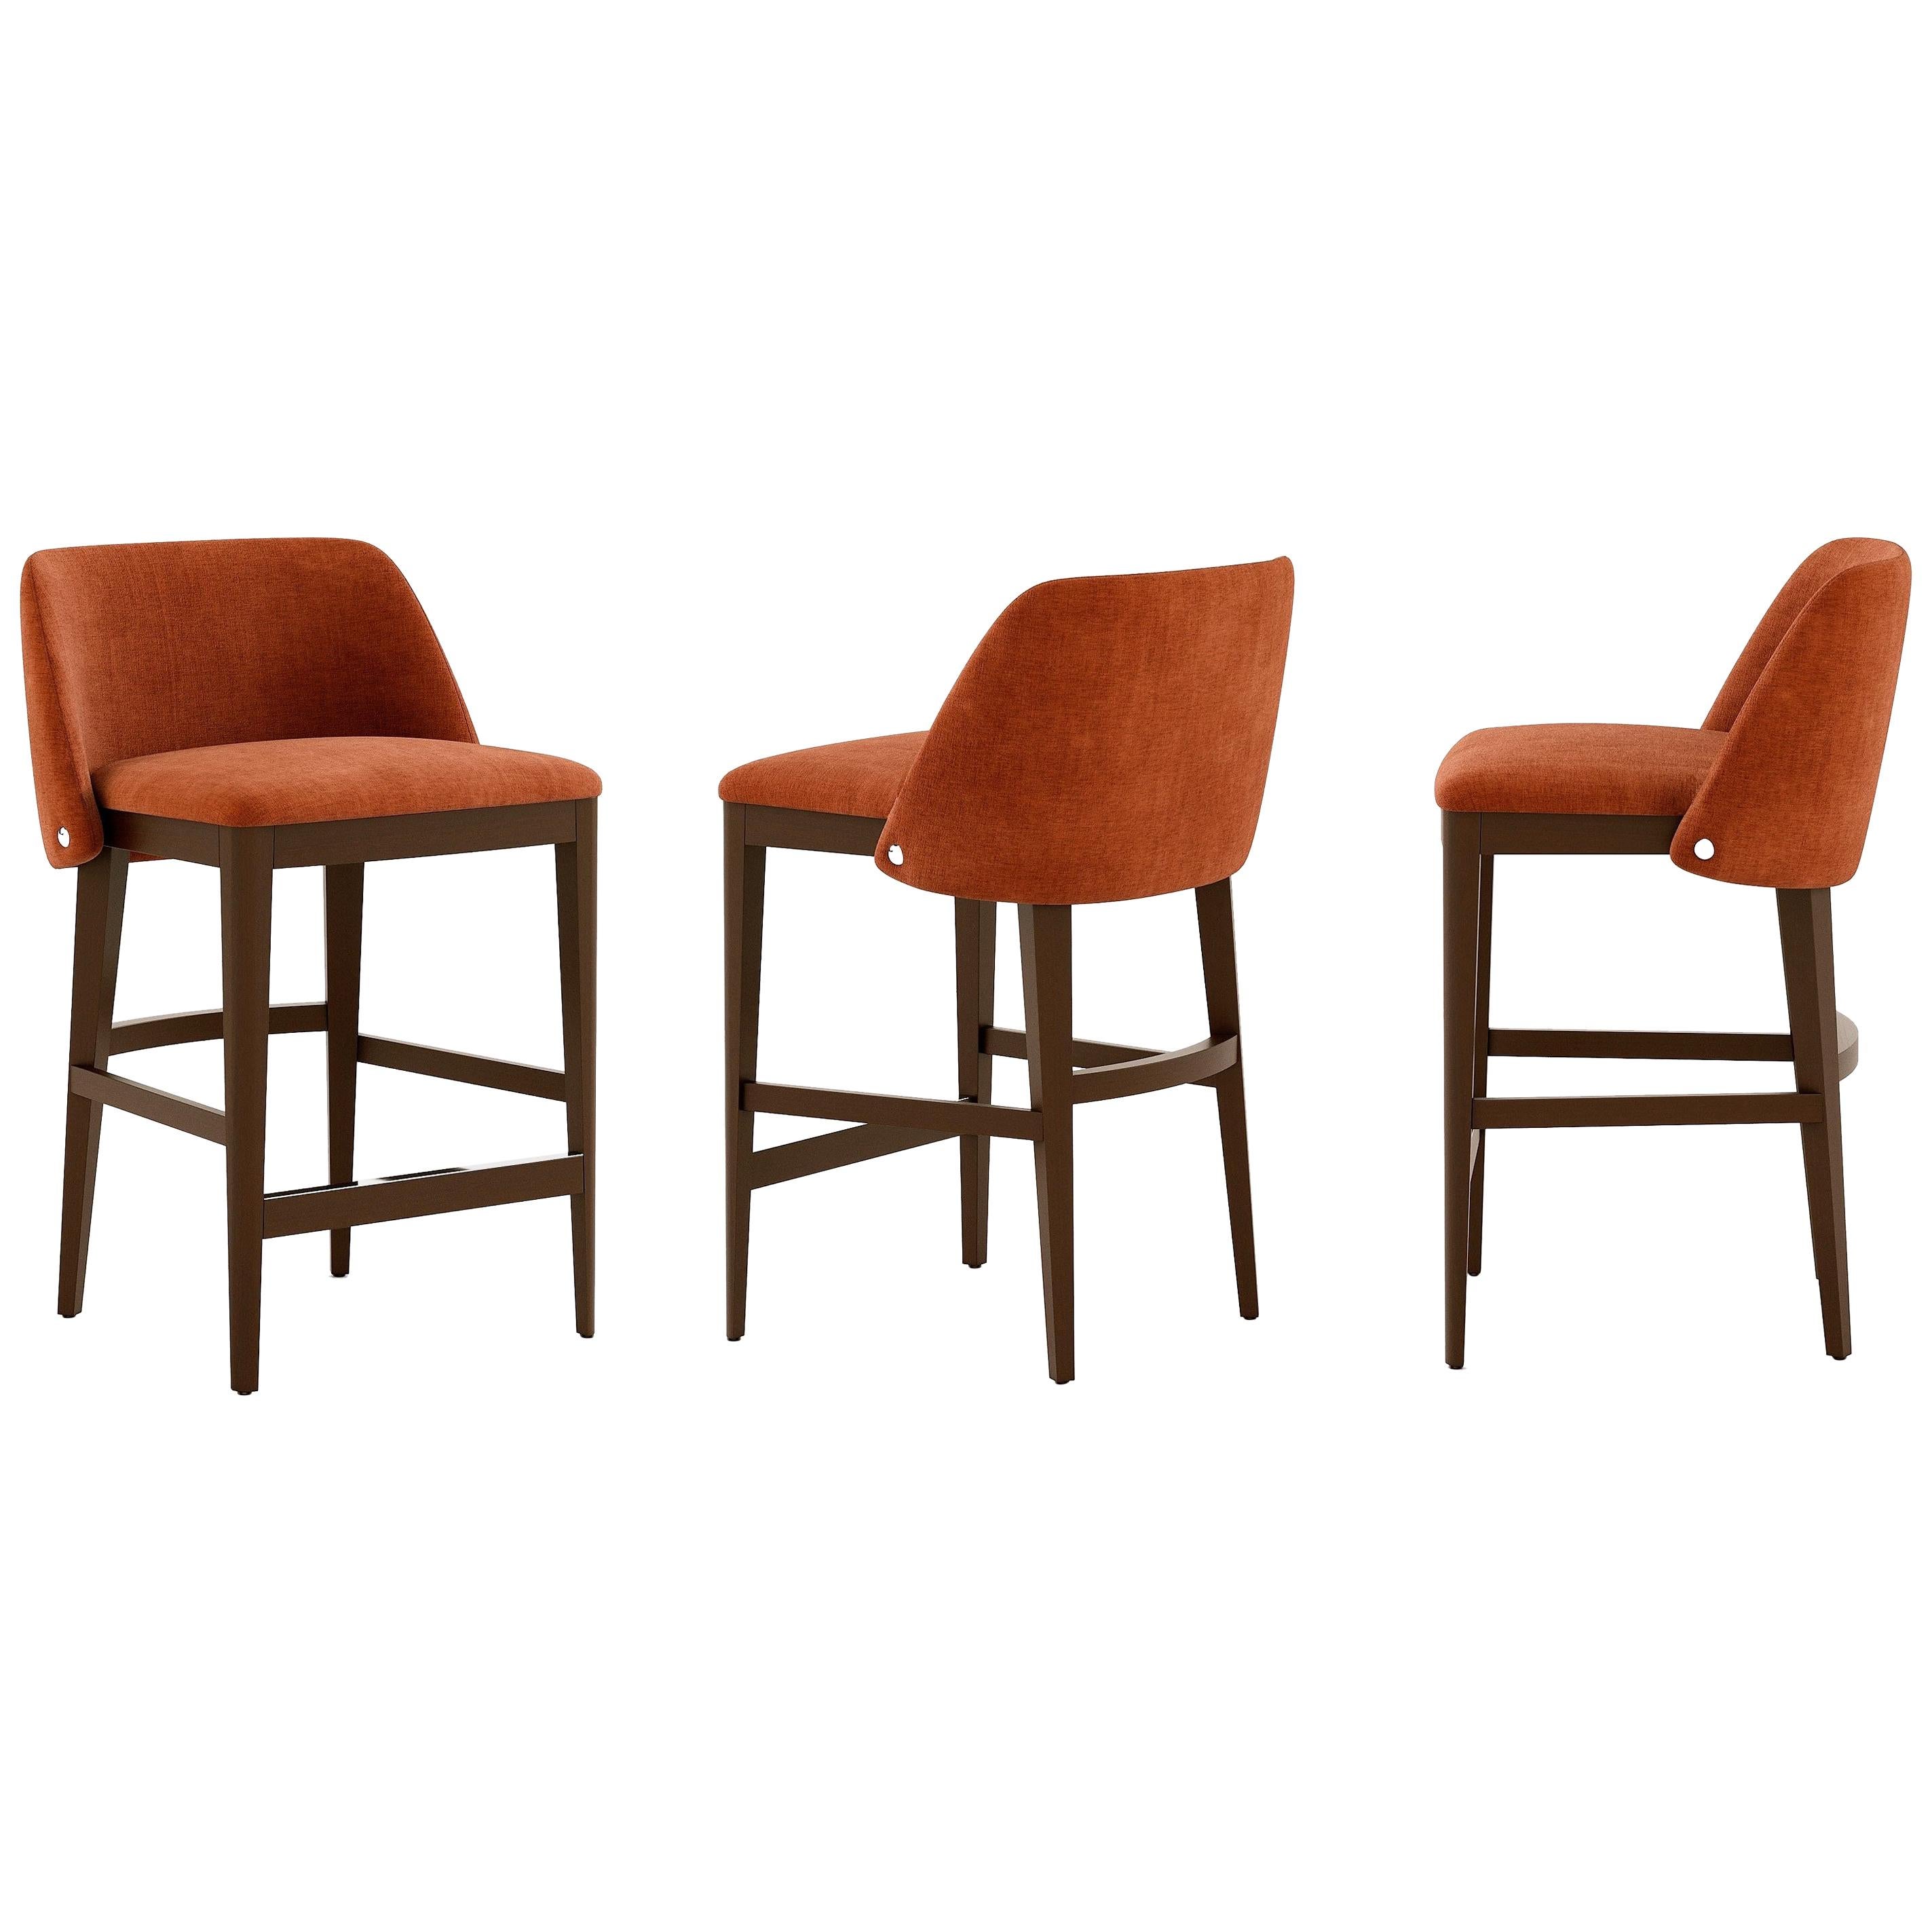 Set of 3 Contemporary Counter Height Stools